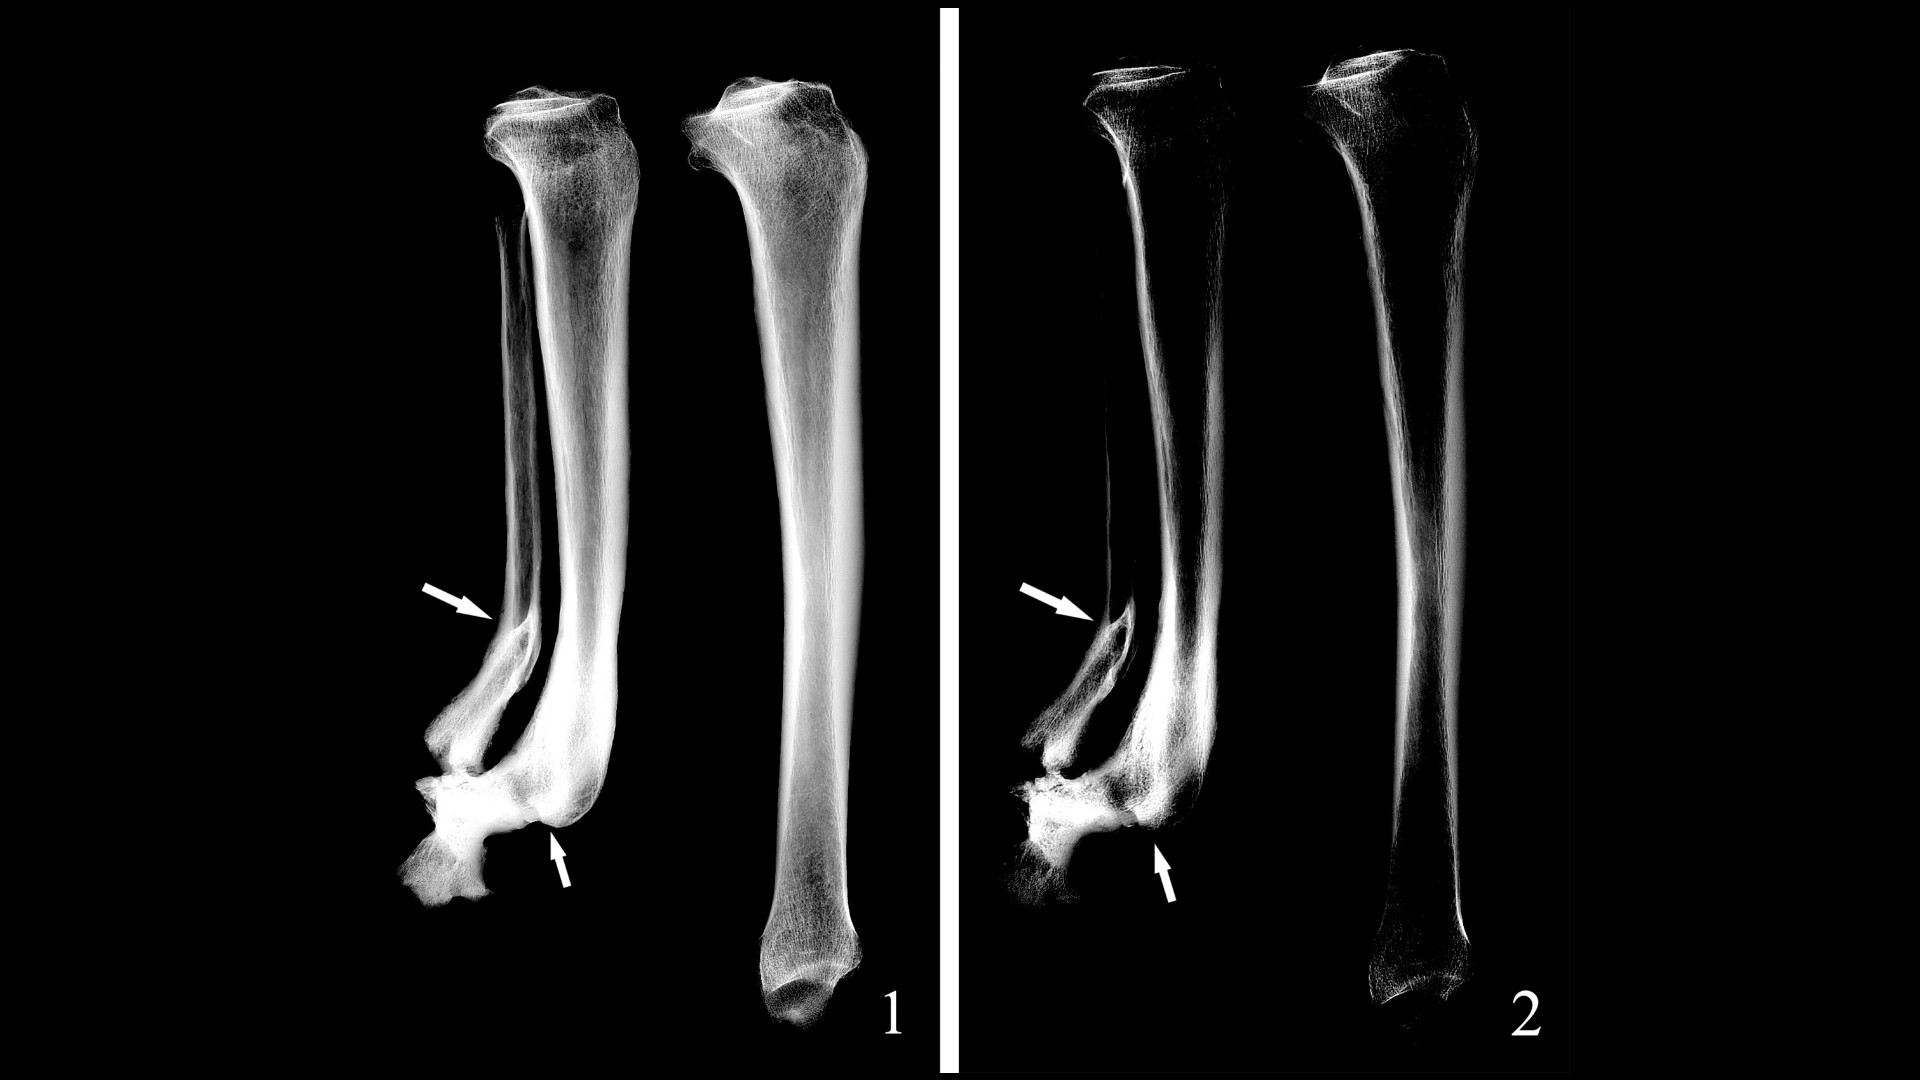 Two x-rays side by side showing the left and right tibia of a 30-35 year old woman who died in China around 3000 years ago. The lower right tibia was amputated and the x-ray shows some damage here.